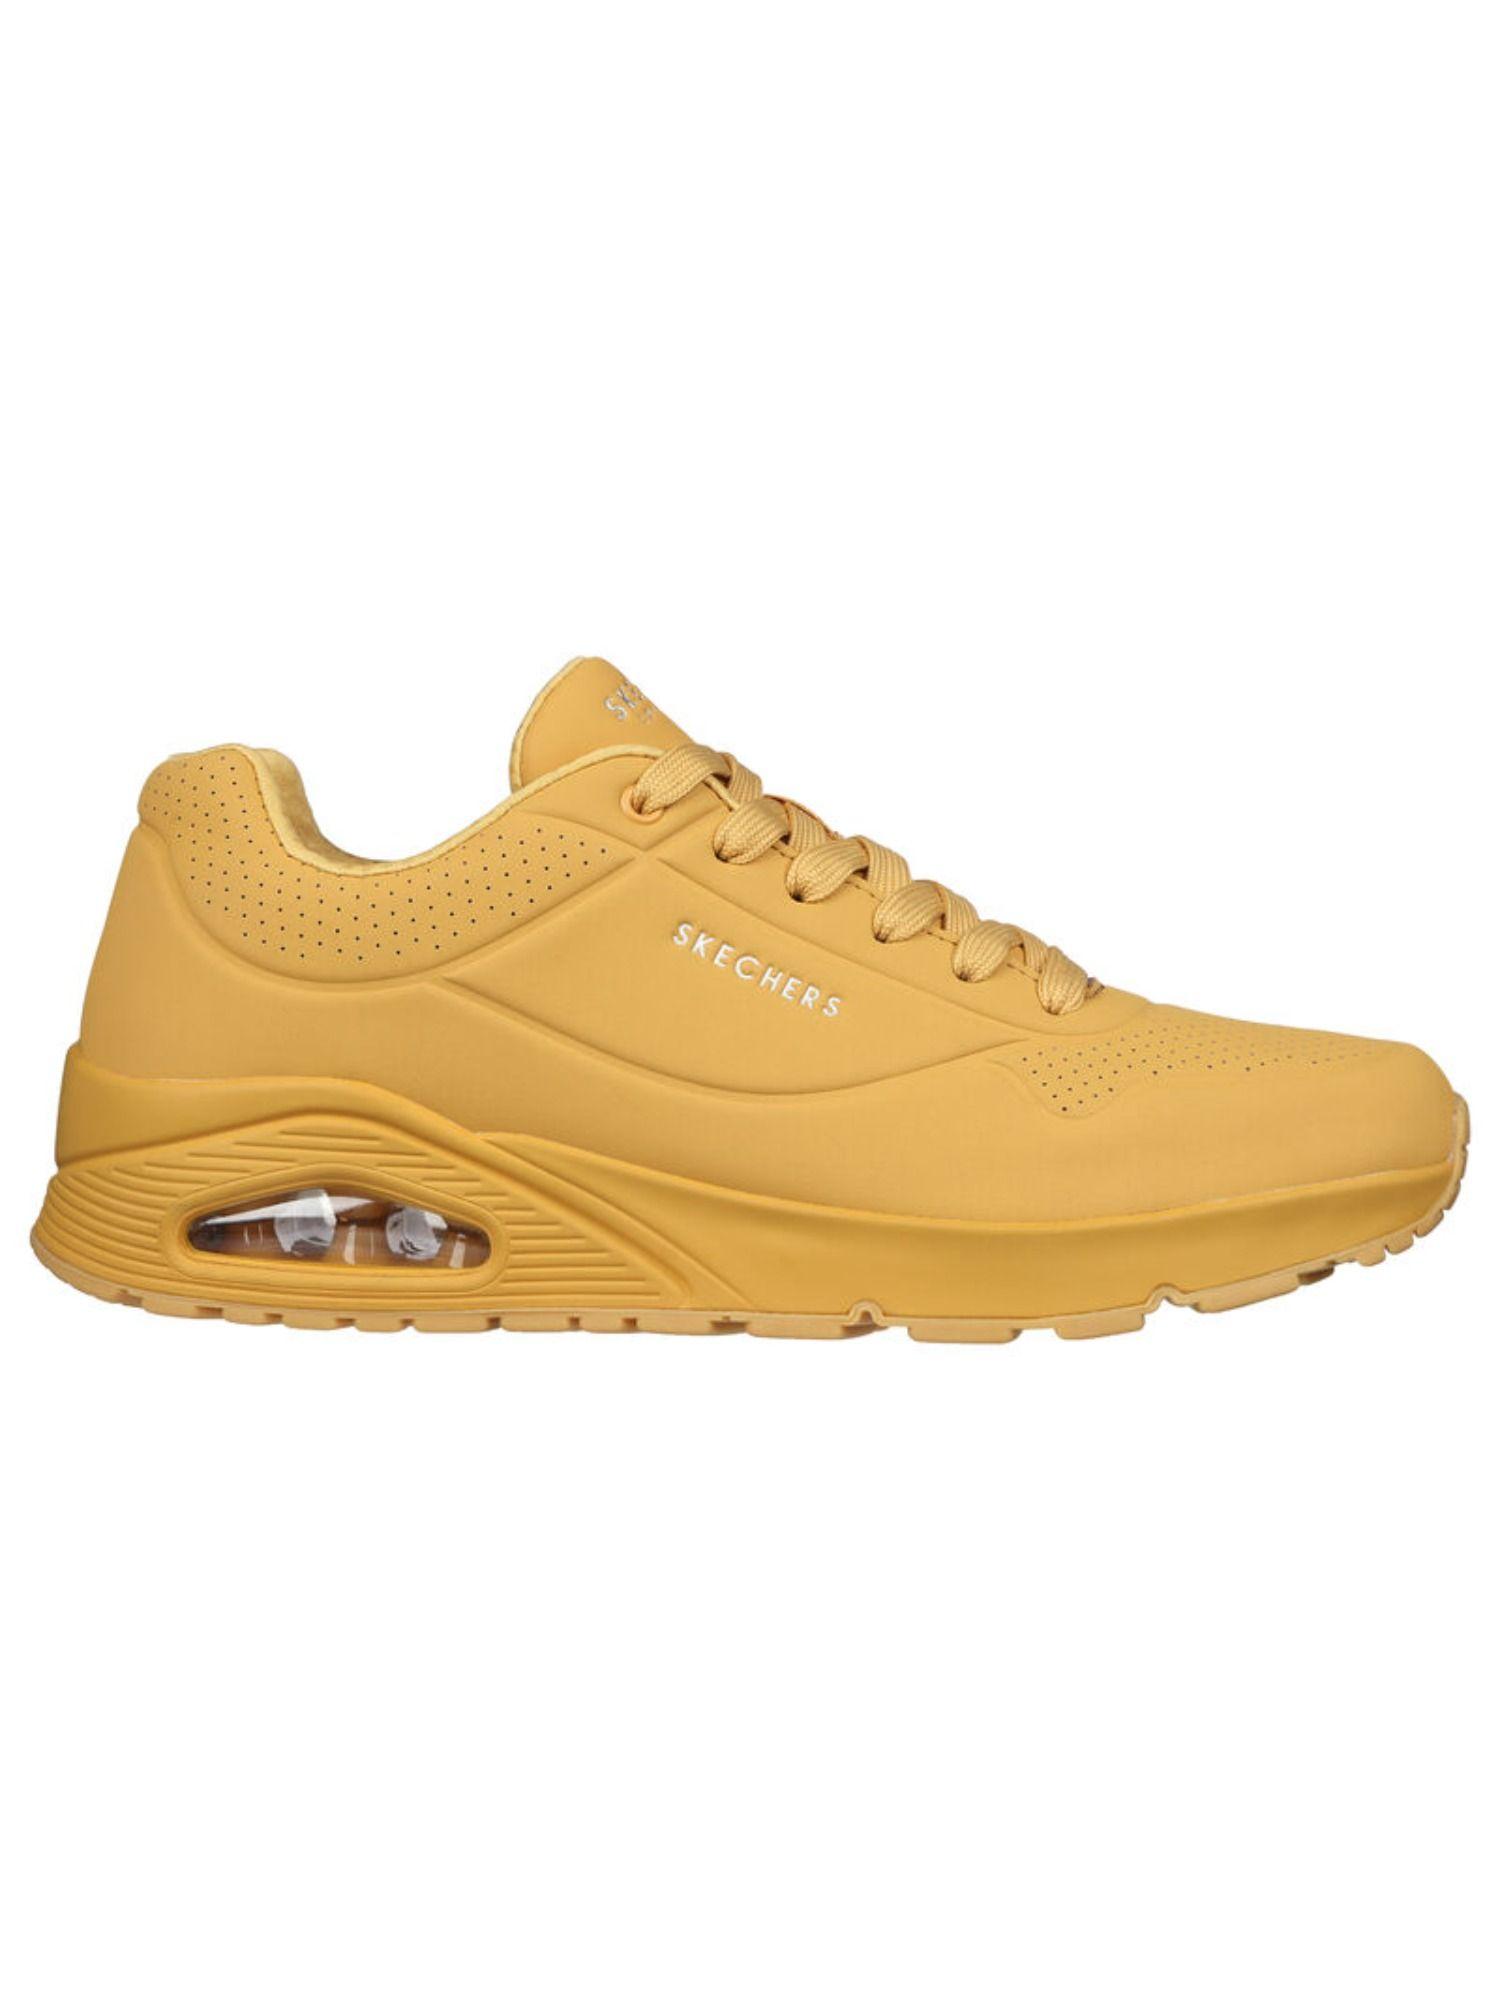 uno - stand on air yellow sneakers